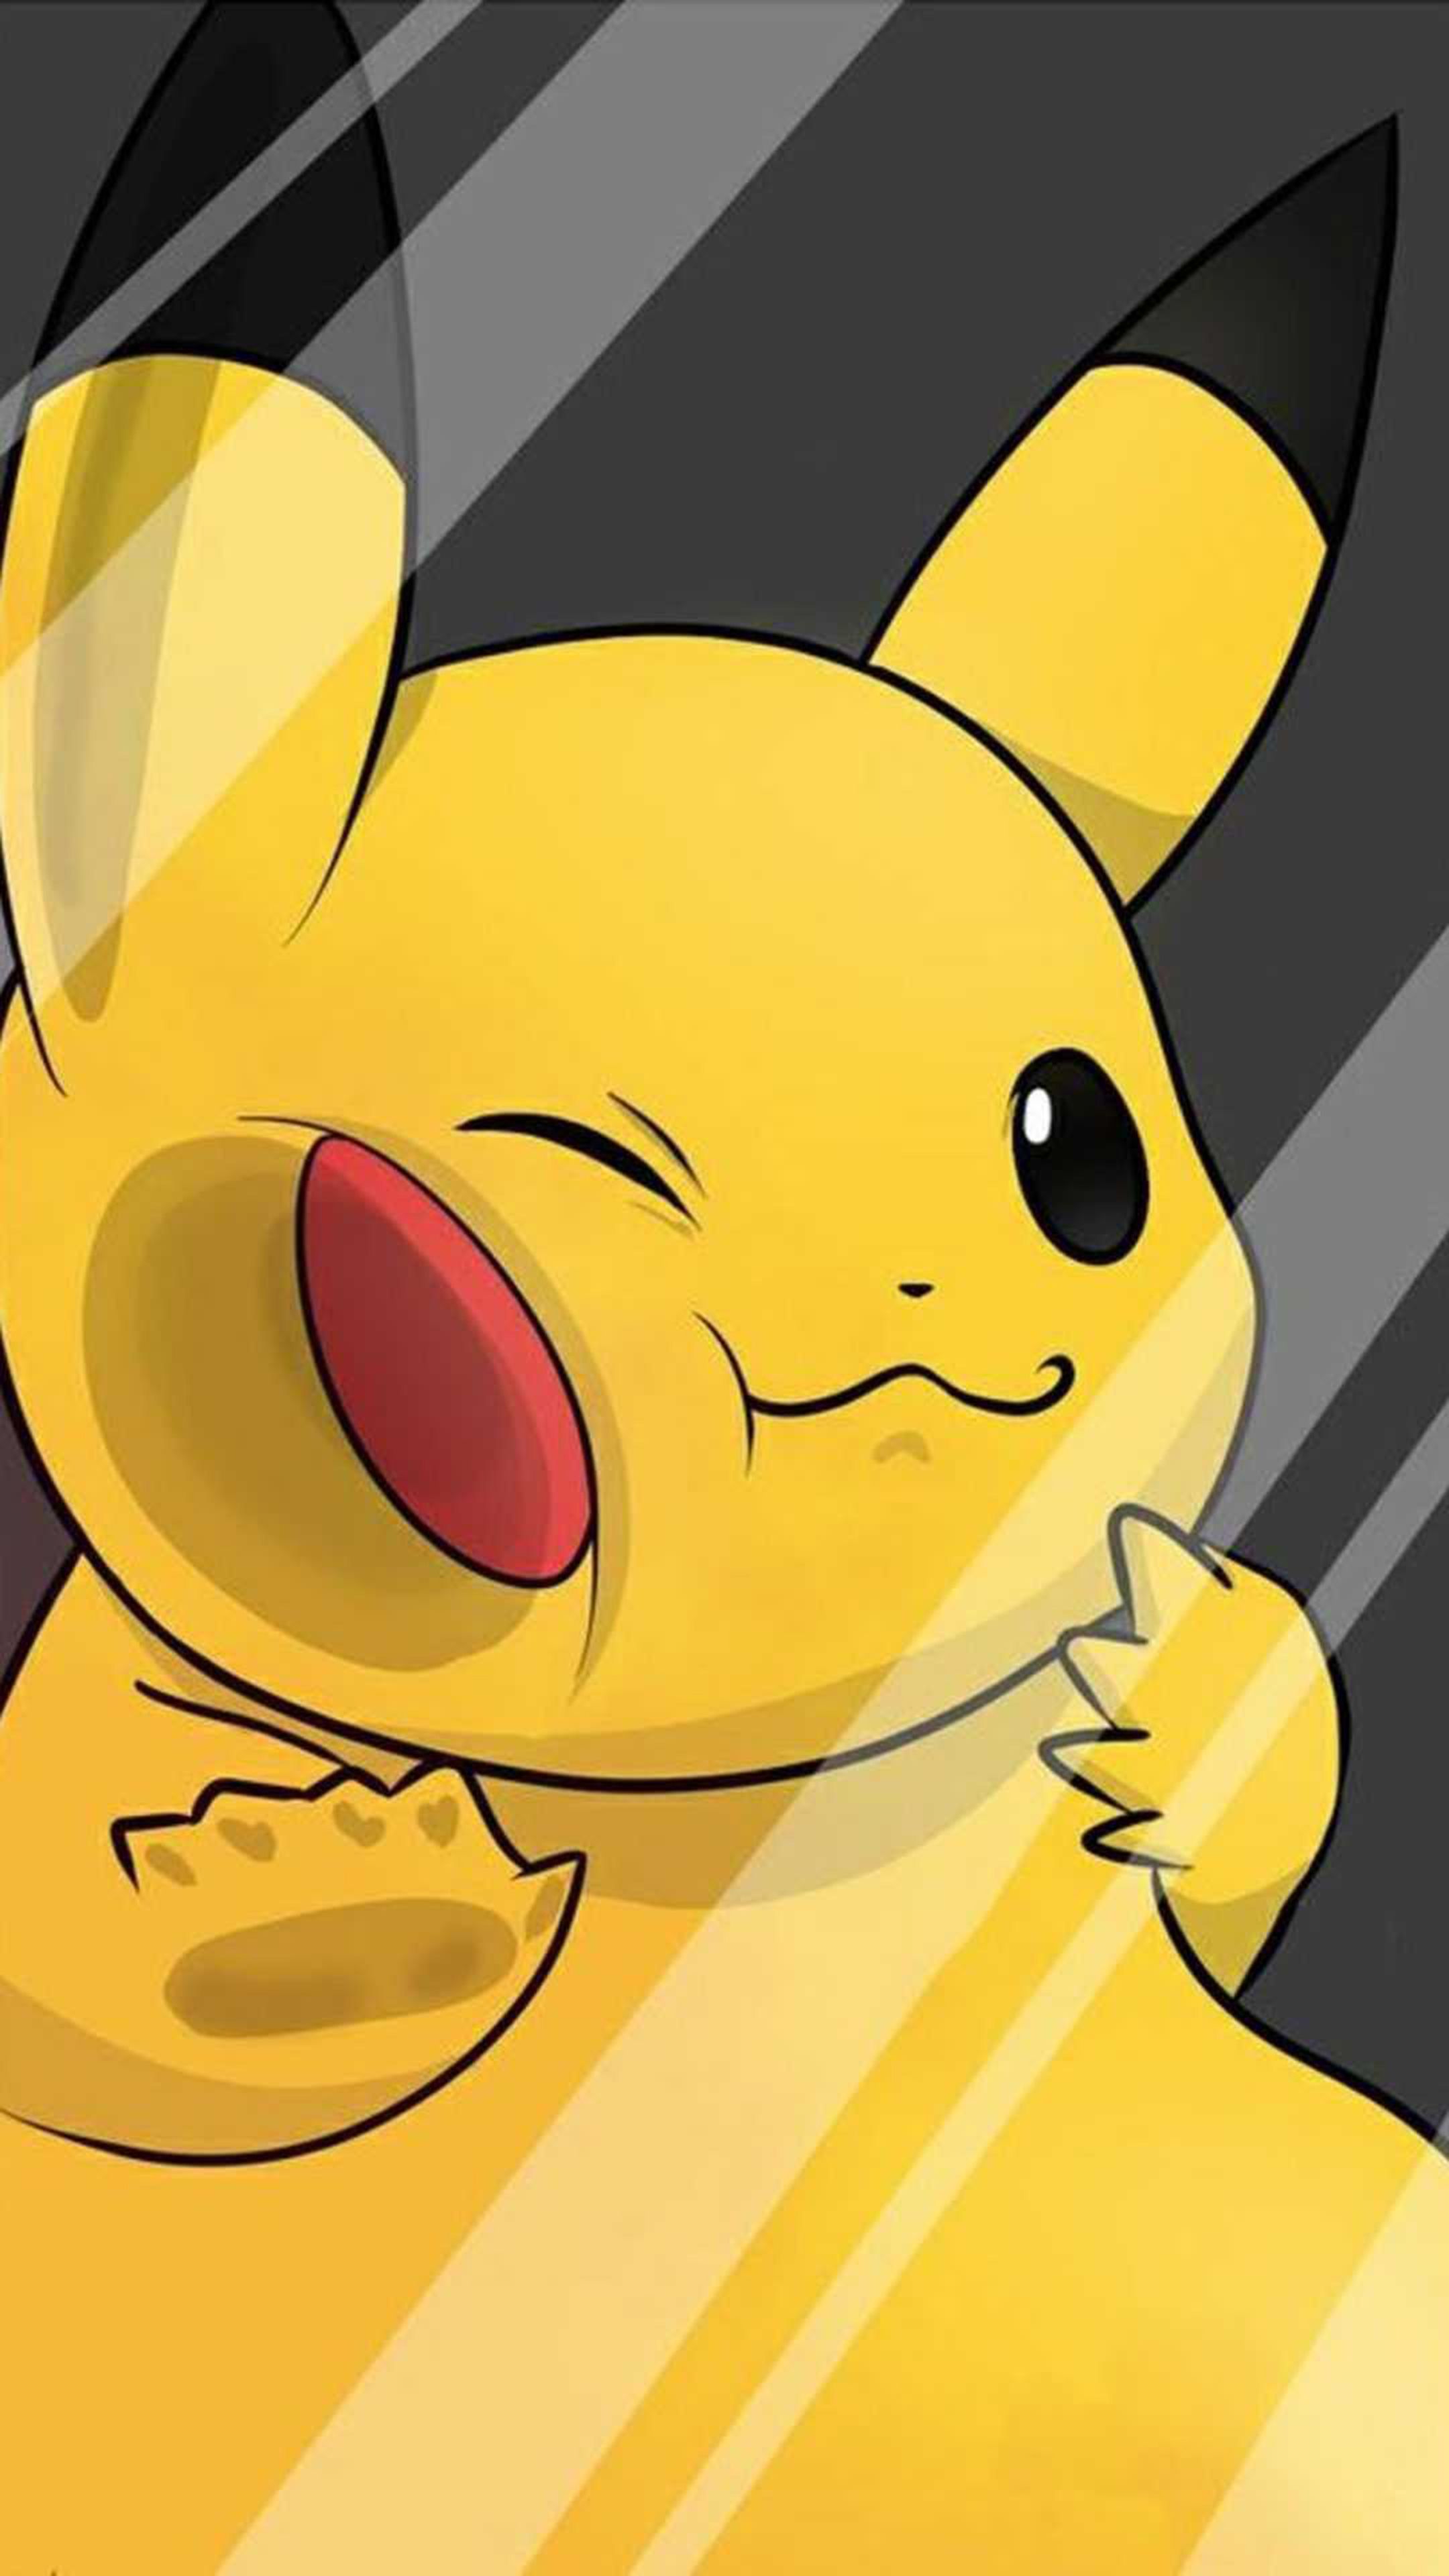 A yellow pikachu with red eyes and an open mouth - Pikachu